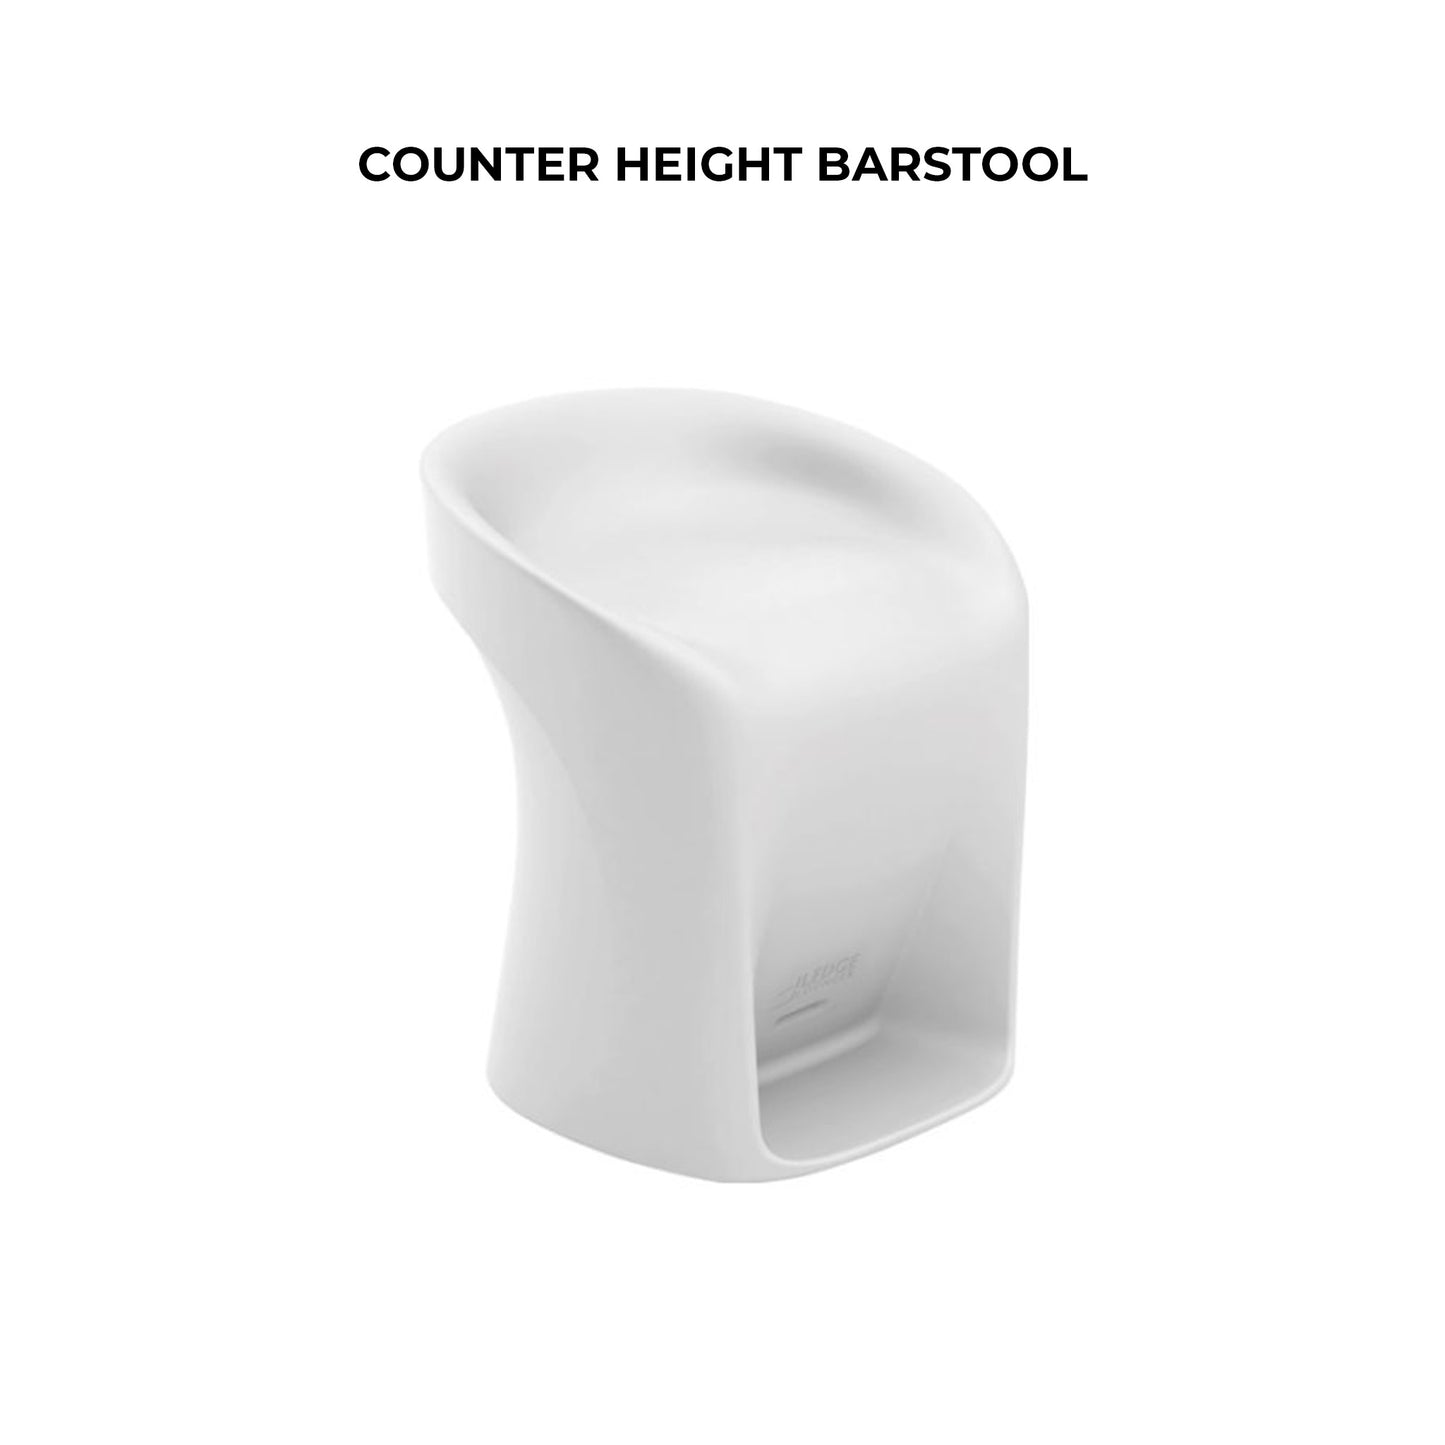 Ledge Lounger Signature Barstool - Counter Height